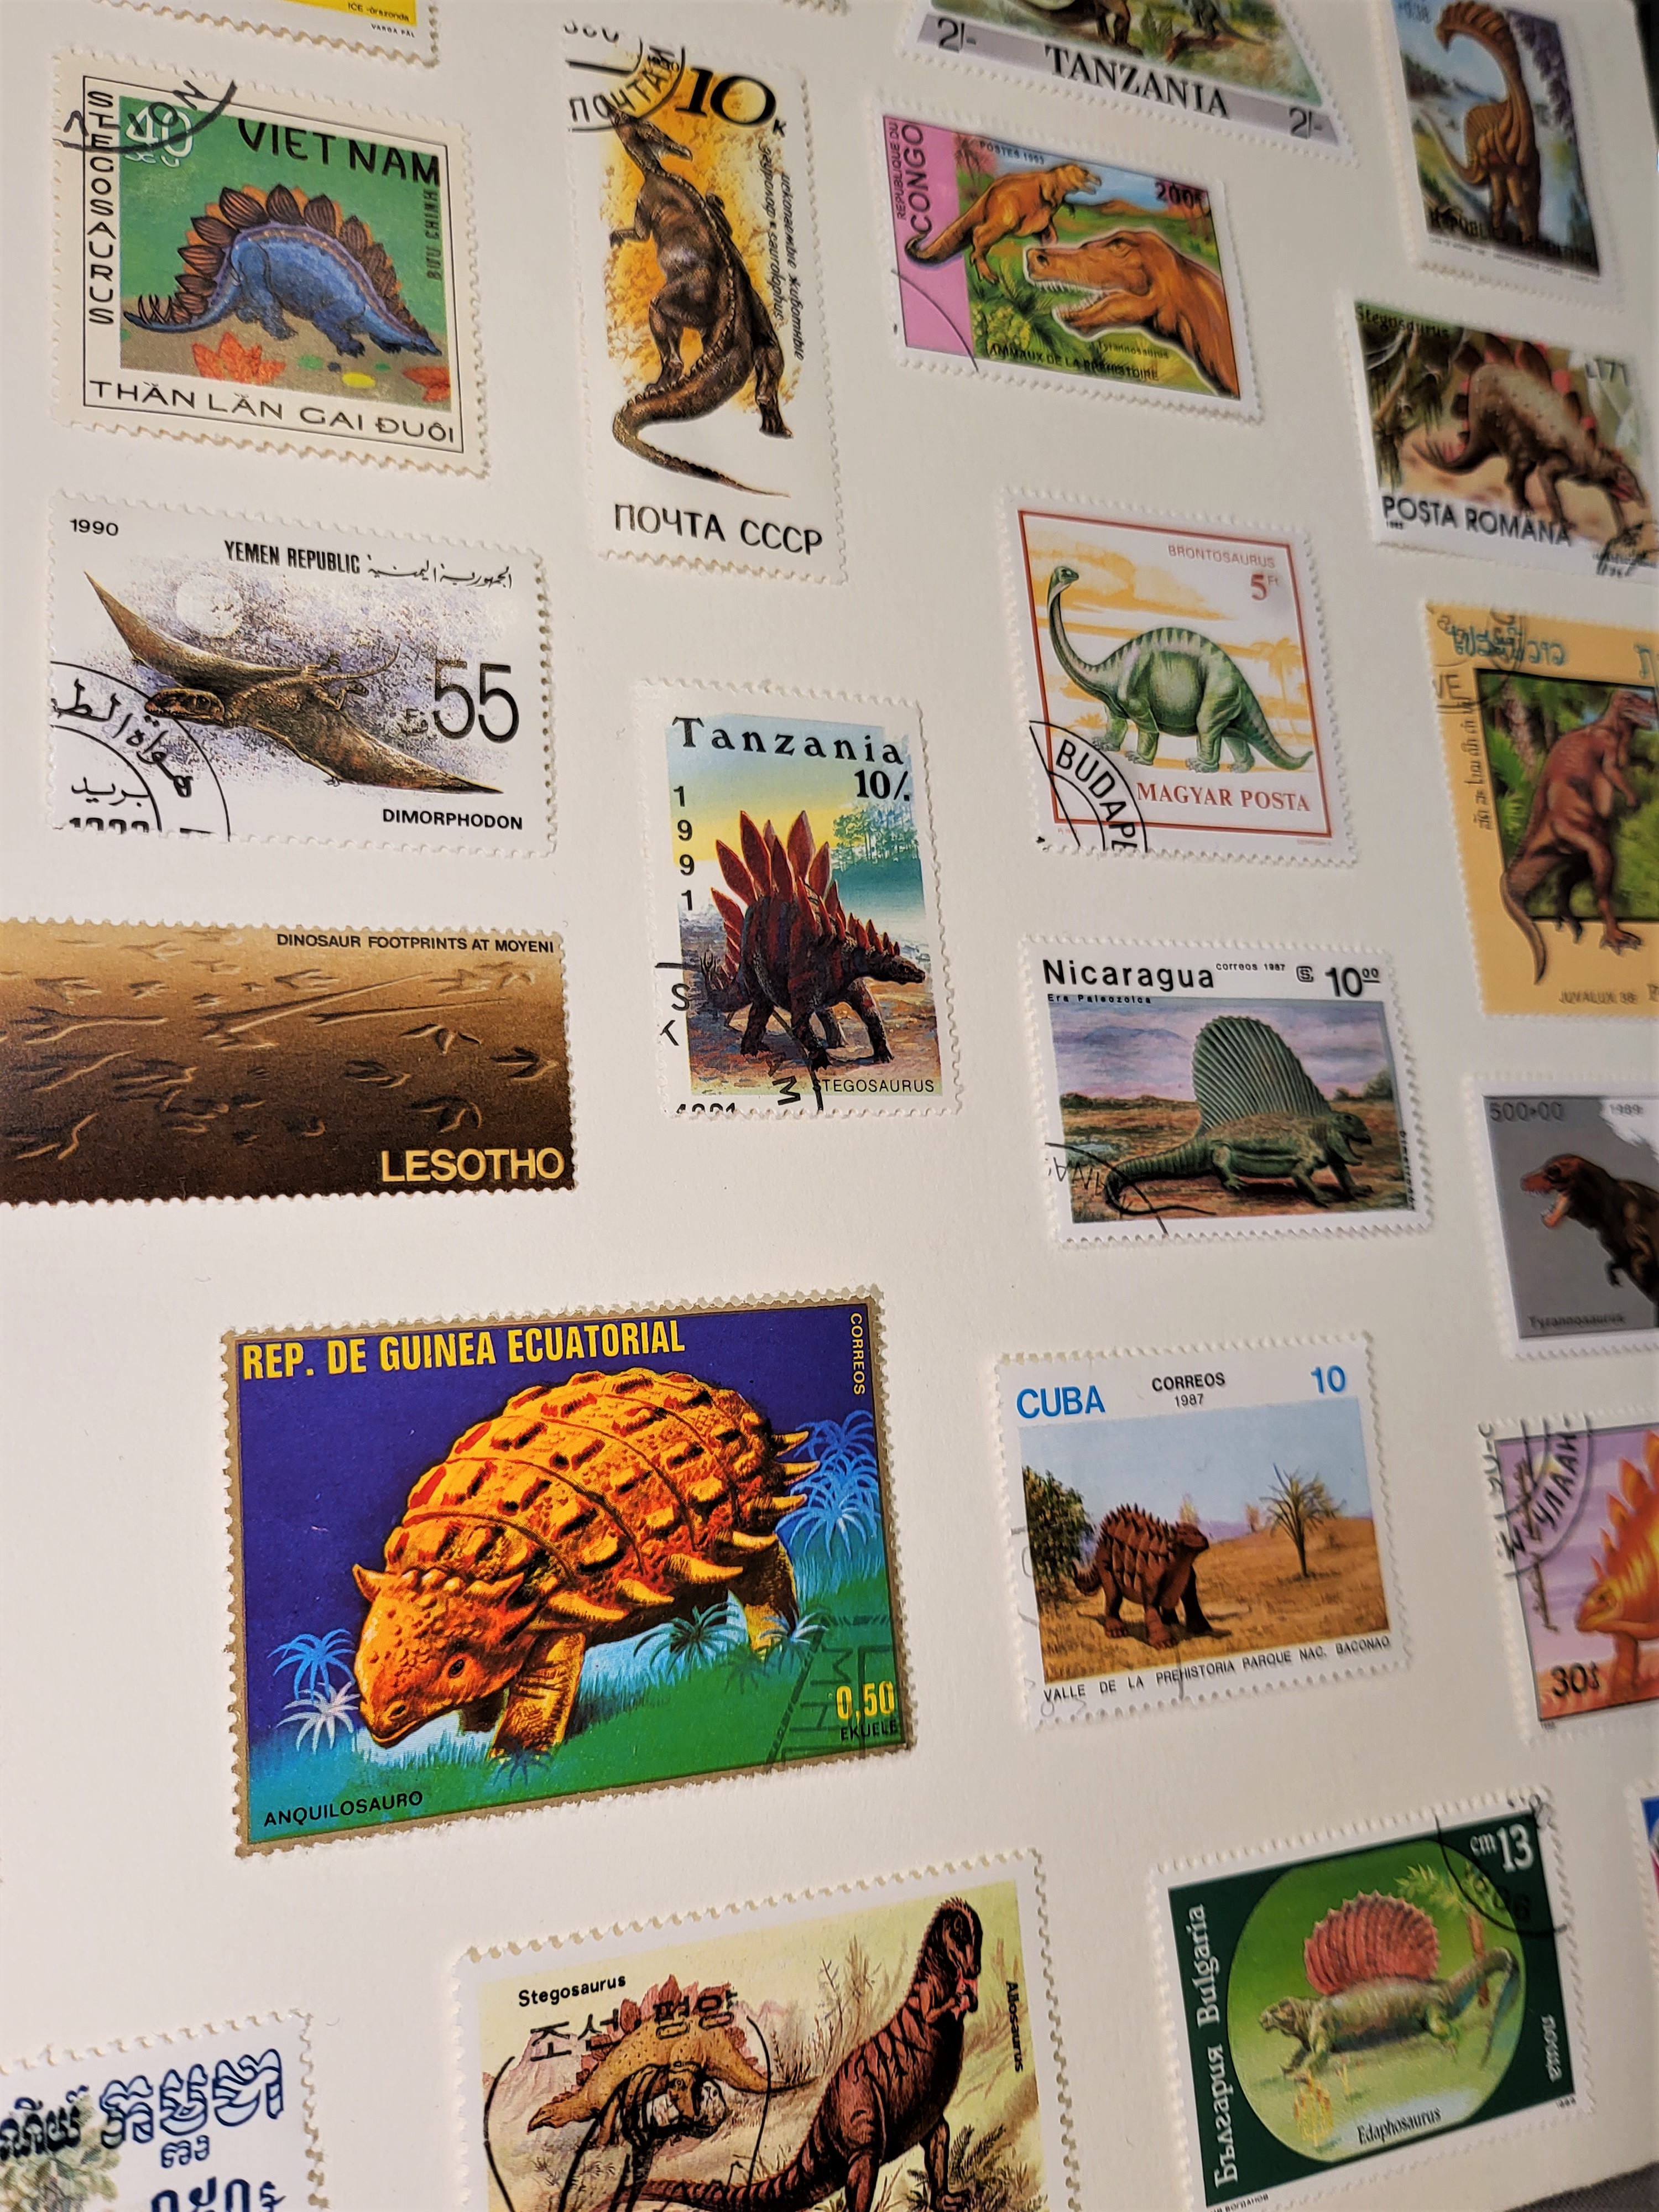 Gallery of stamps from our new presenting case about Dinosaurs in the Post.